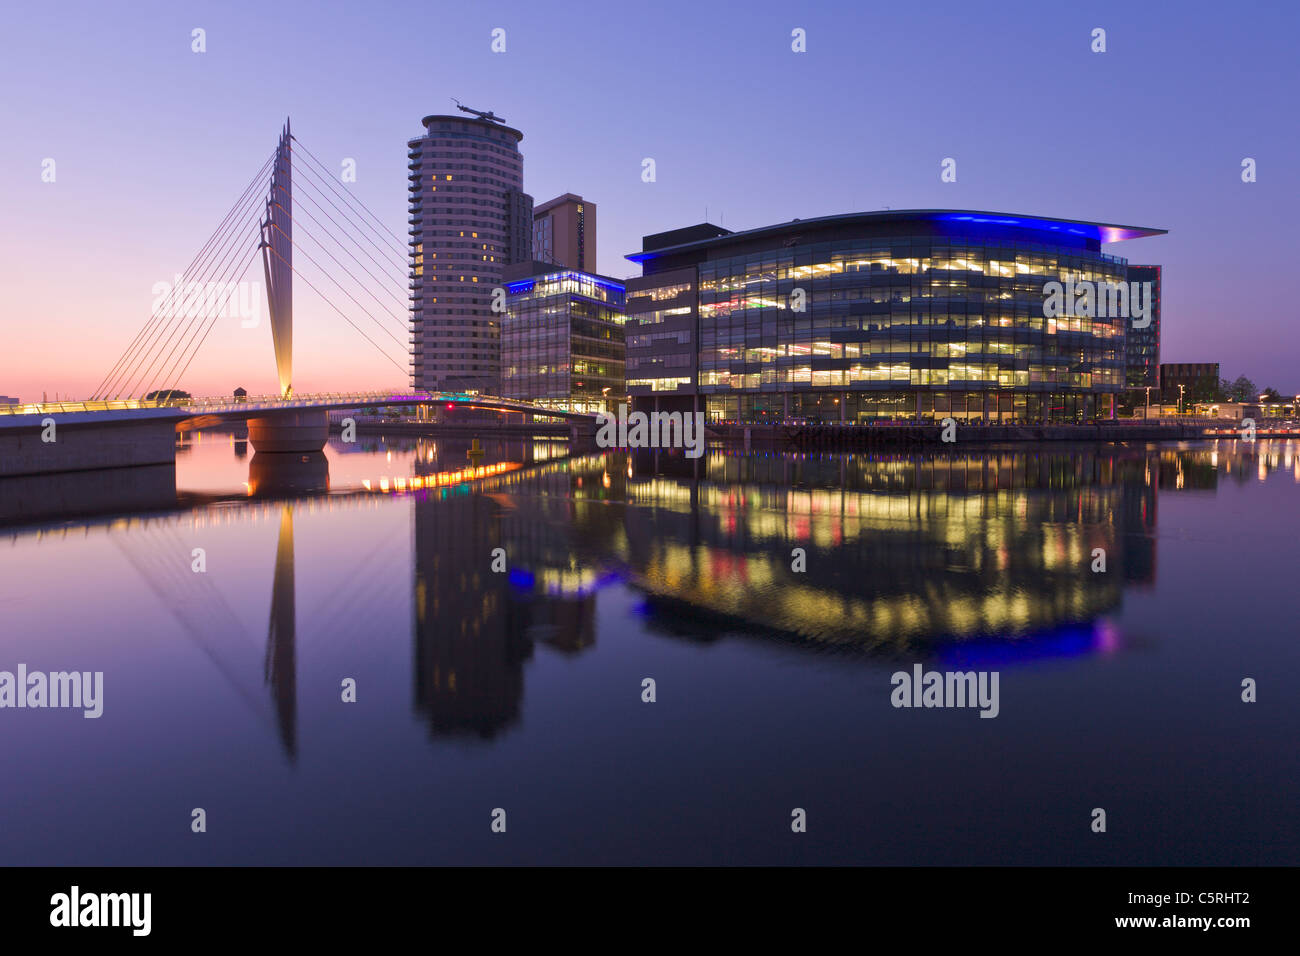 Media City at night, Salford Quays, Manchester Stock Photo